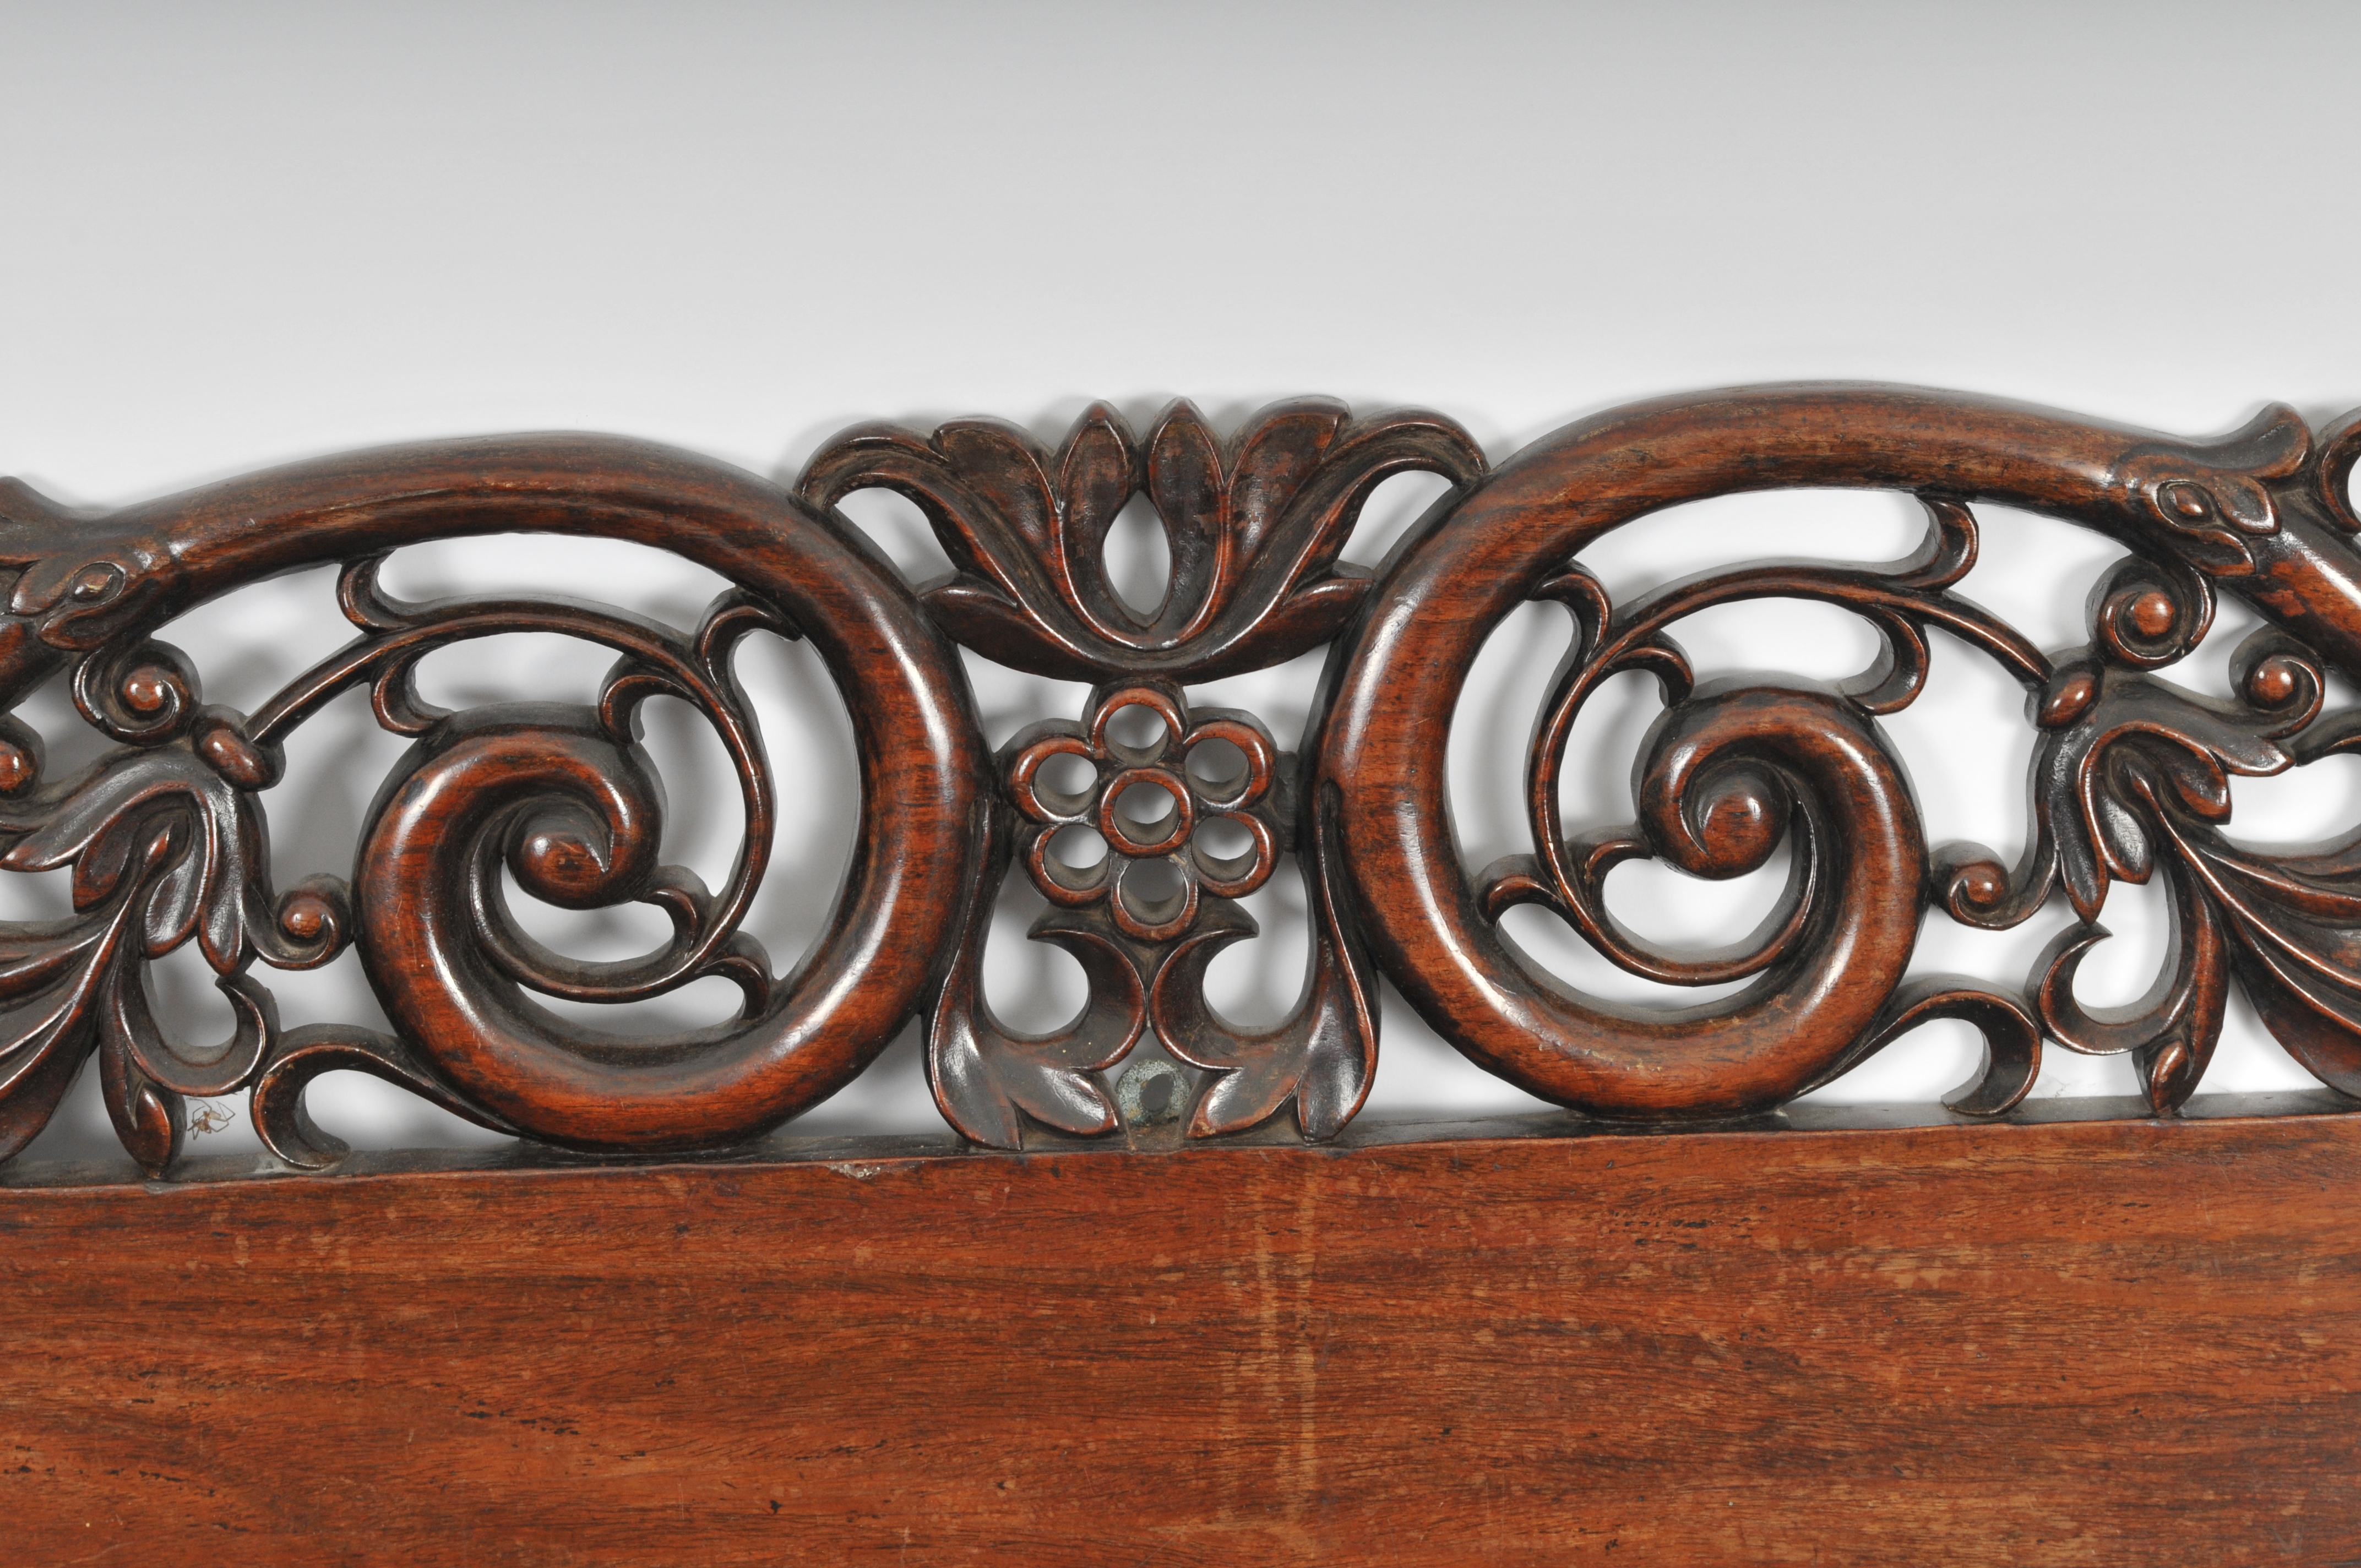 A Regency Anglo-Indian carved rosewood wall shelf - Image 3 of 4